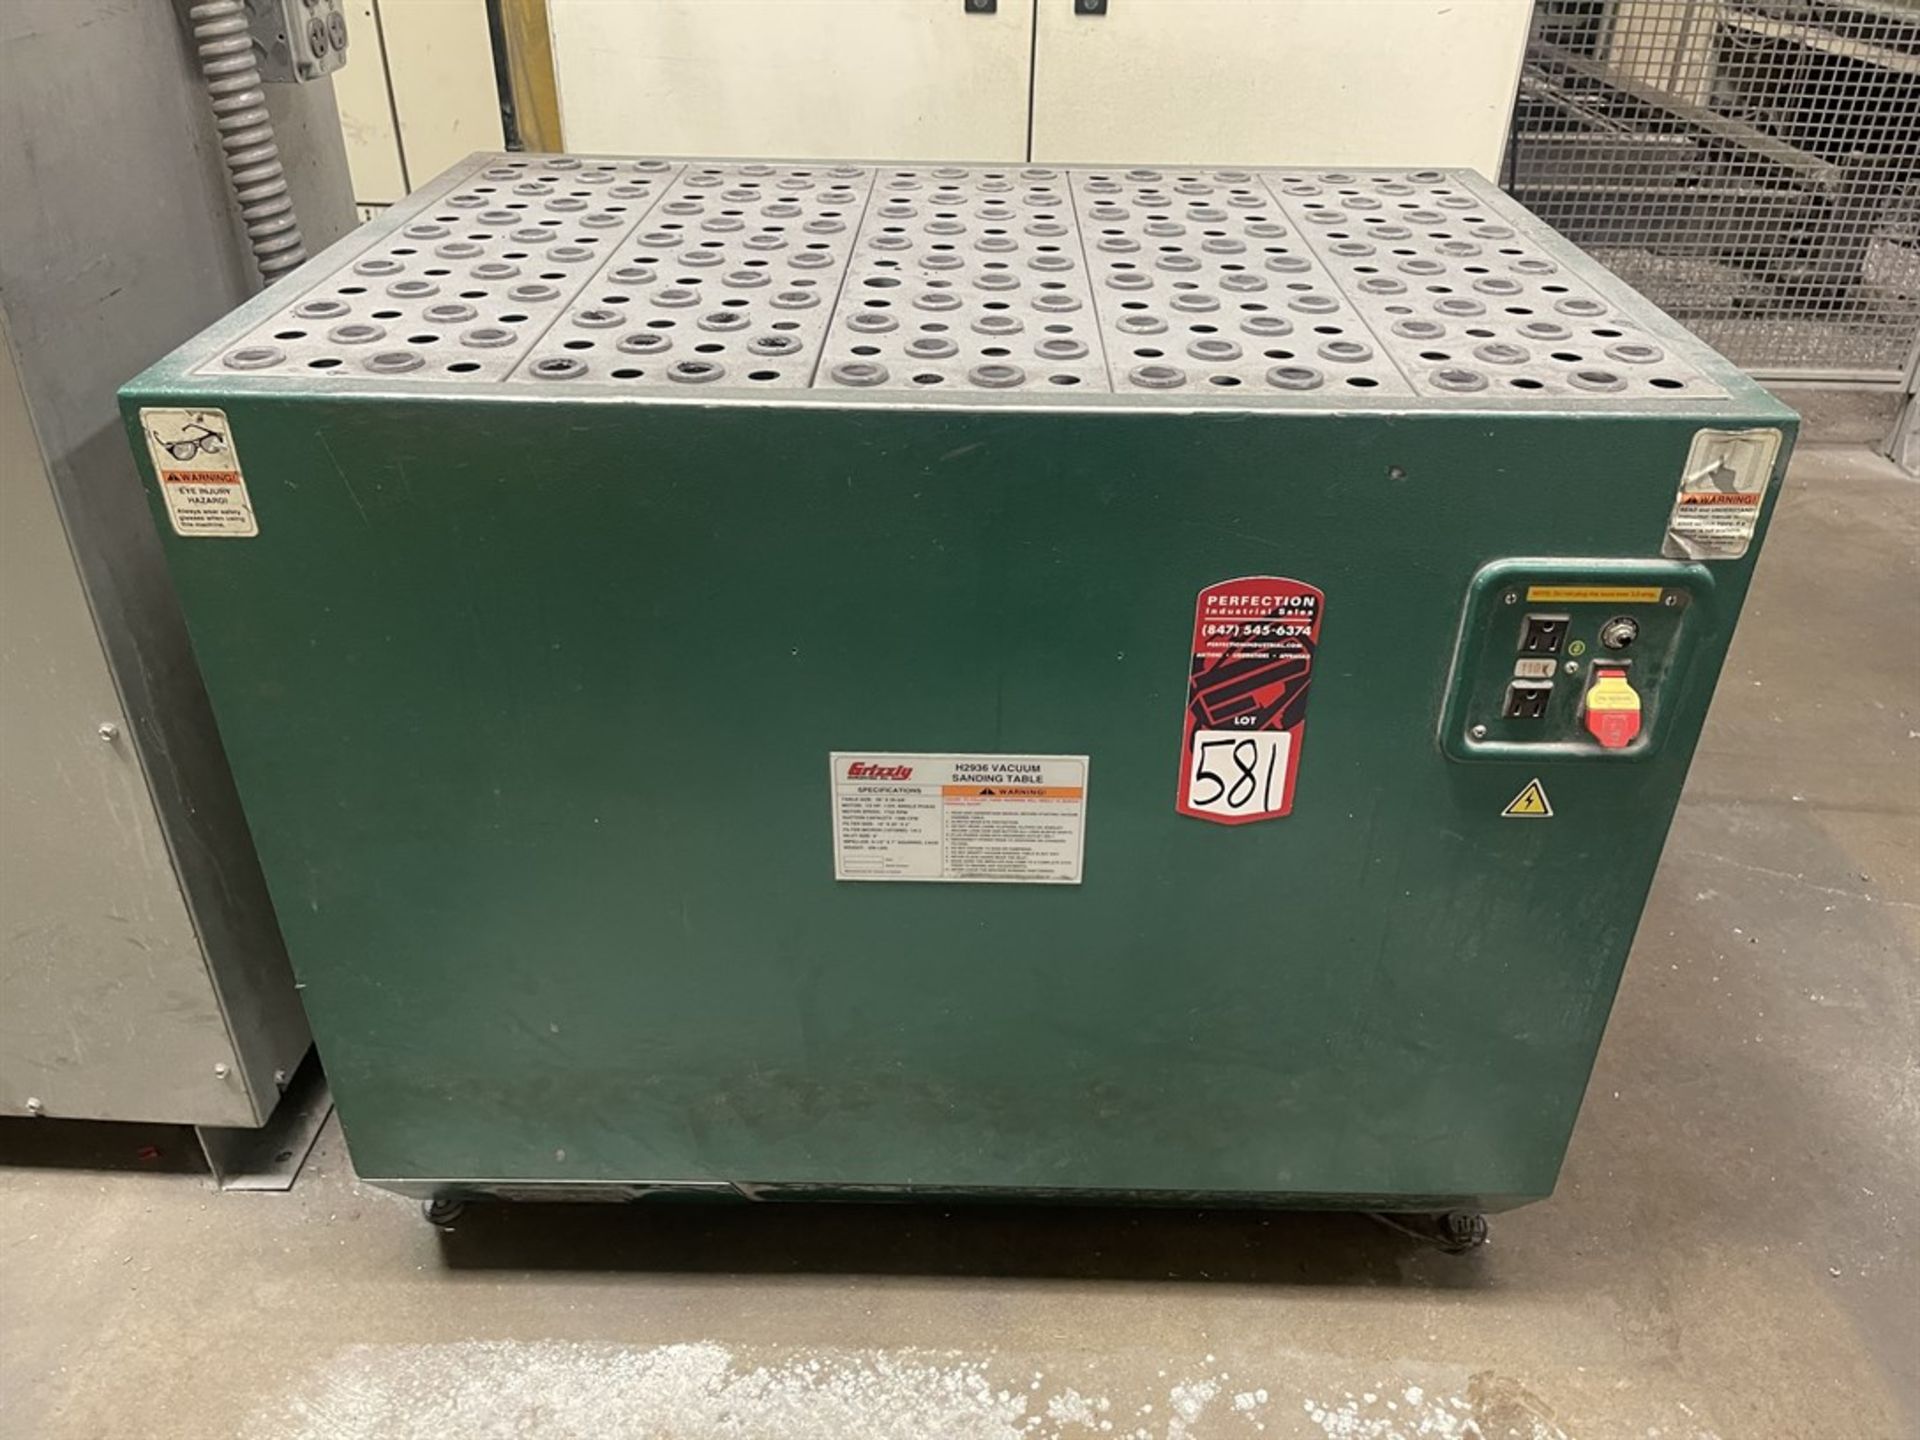 2010 GRIZZLY H2936 Vacuum Sanding Table, s/n E01889, 28” x 39” Table, ½ HP, 1725 RPM, 1490 CFM